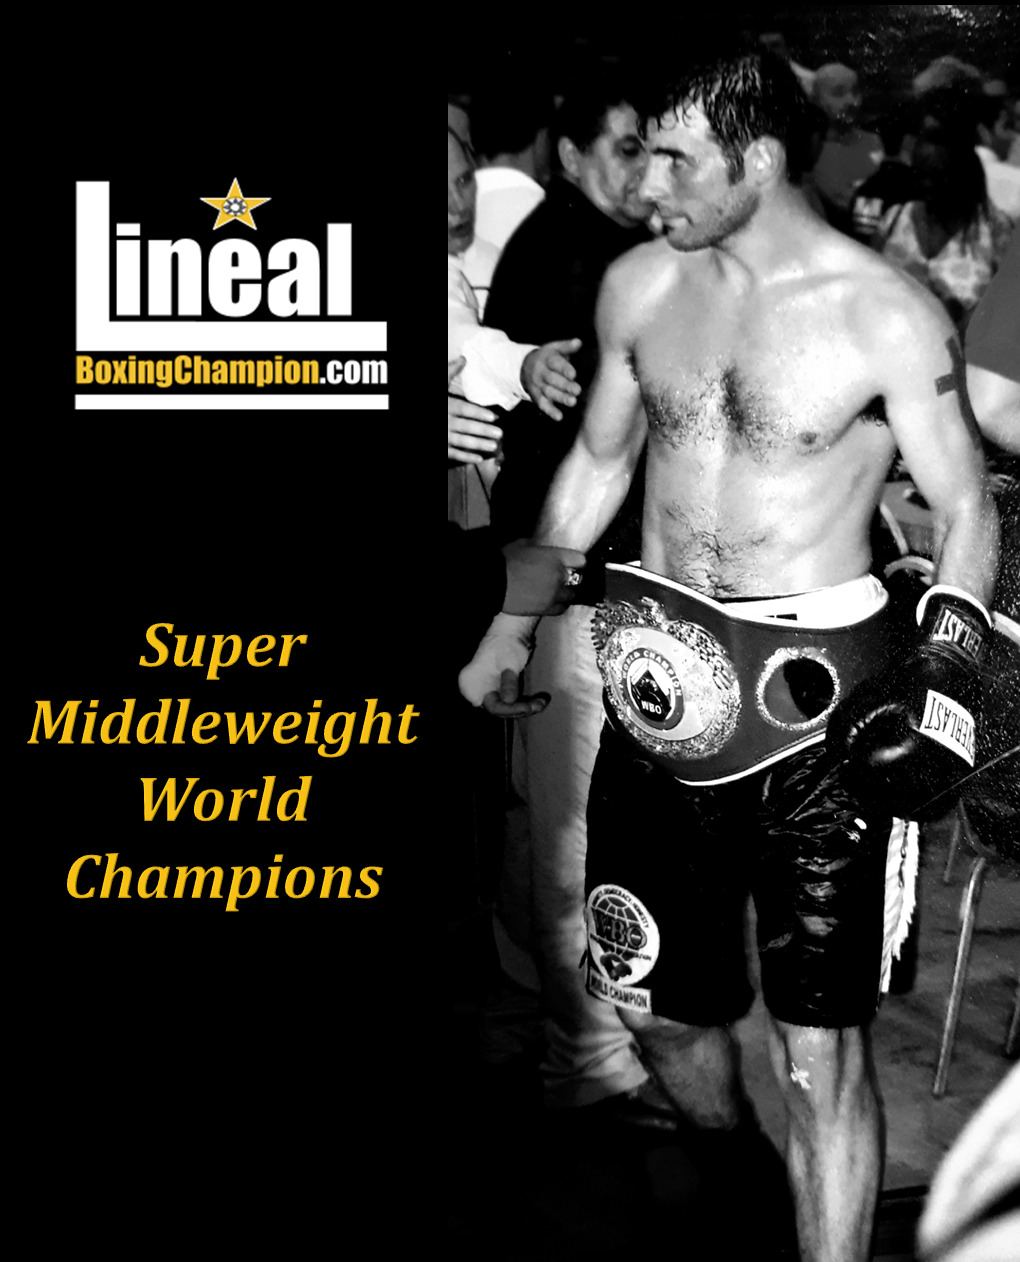 Tag fat negativ Fatal LinealBoxingChampion.com: The Record Keeper of Boxing's Lineal Title